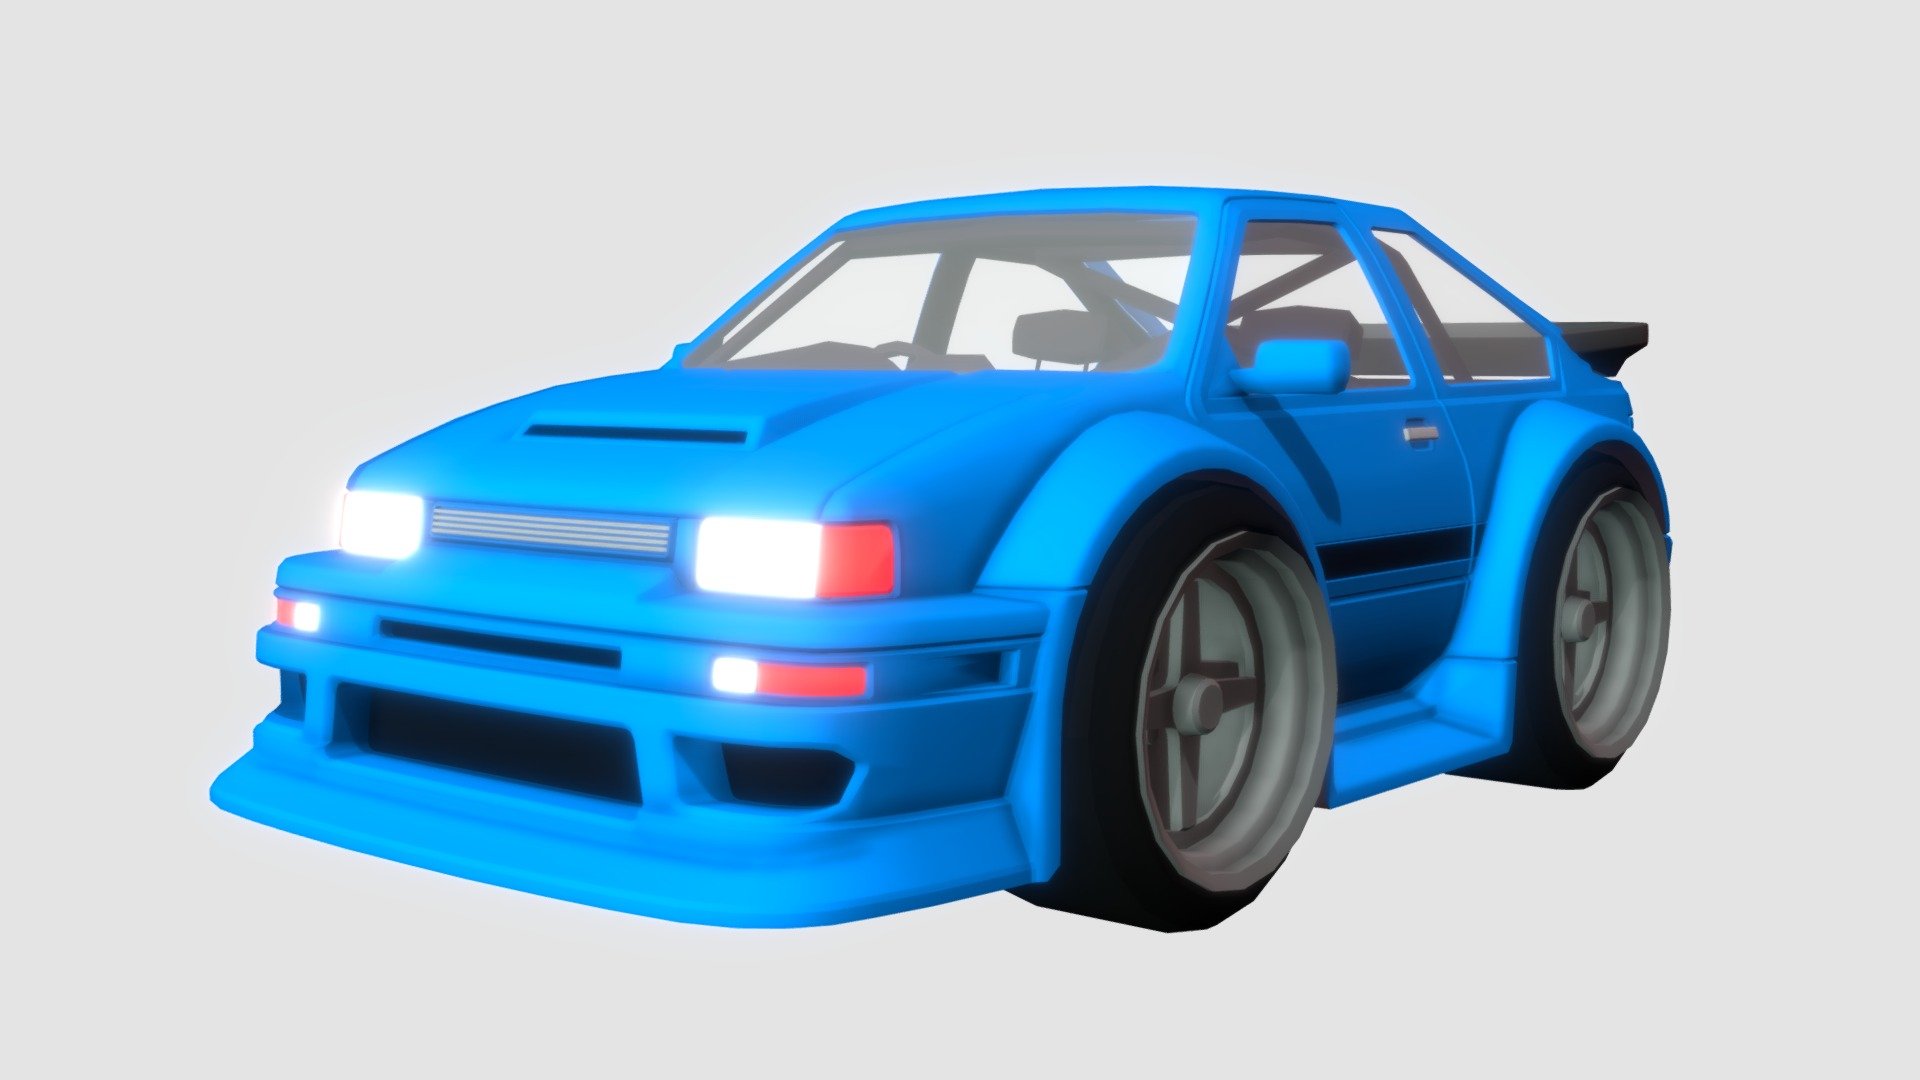 Cartoon Sports Car

Modeled and textured by pr1me_3d in Blender-3.0.

Please follow and support us for more free model and do comment if you like it 3d model